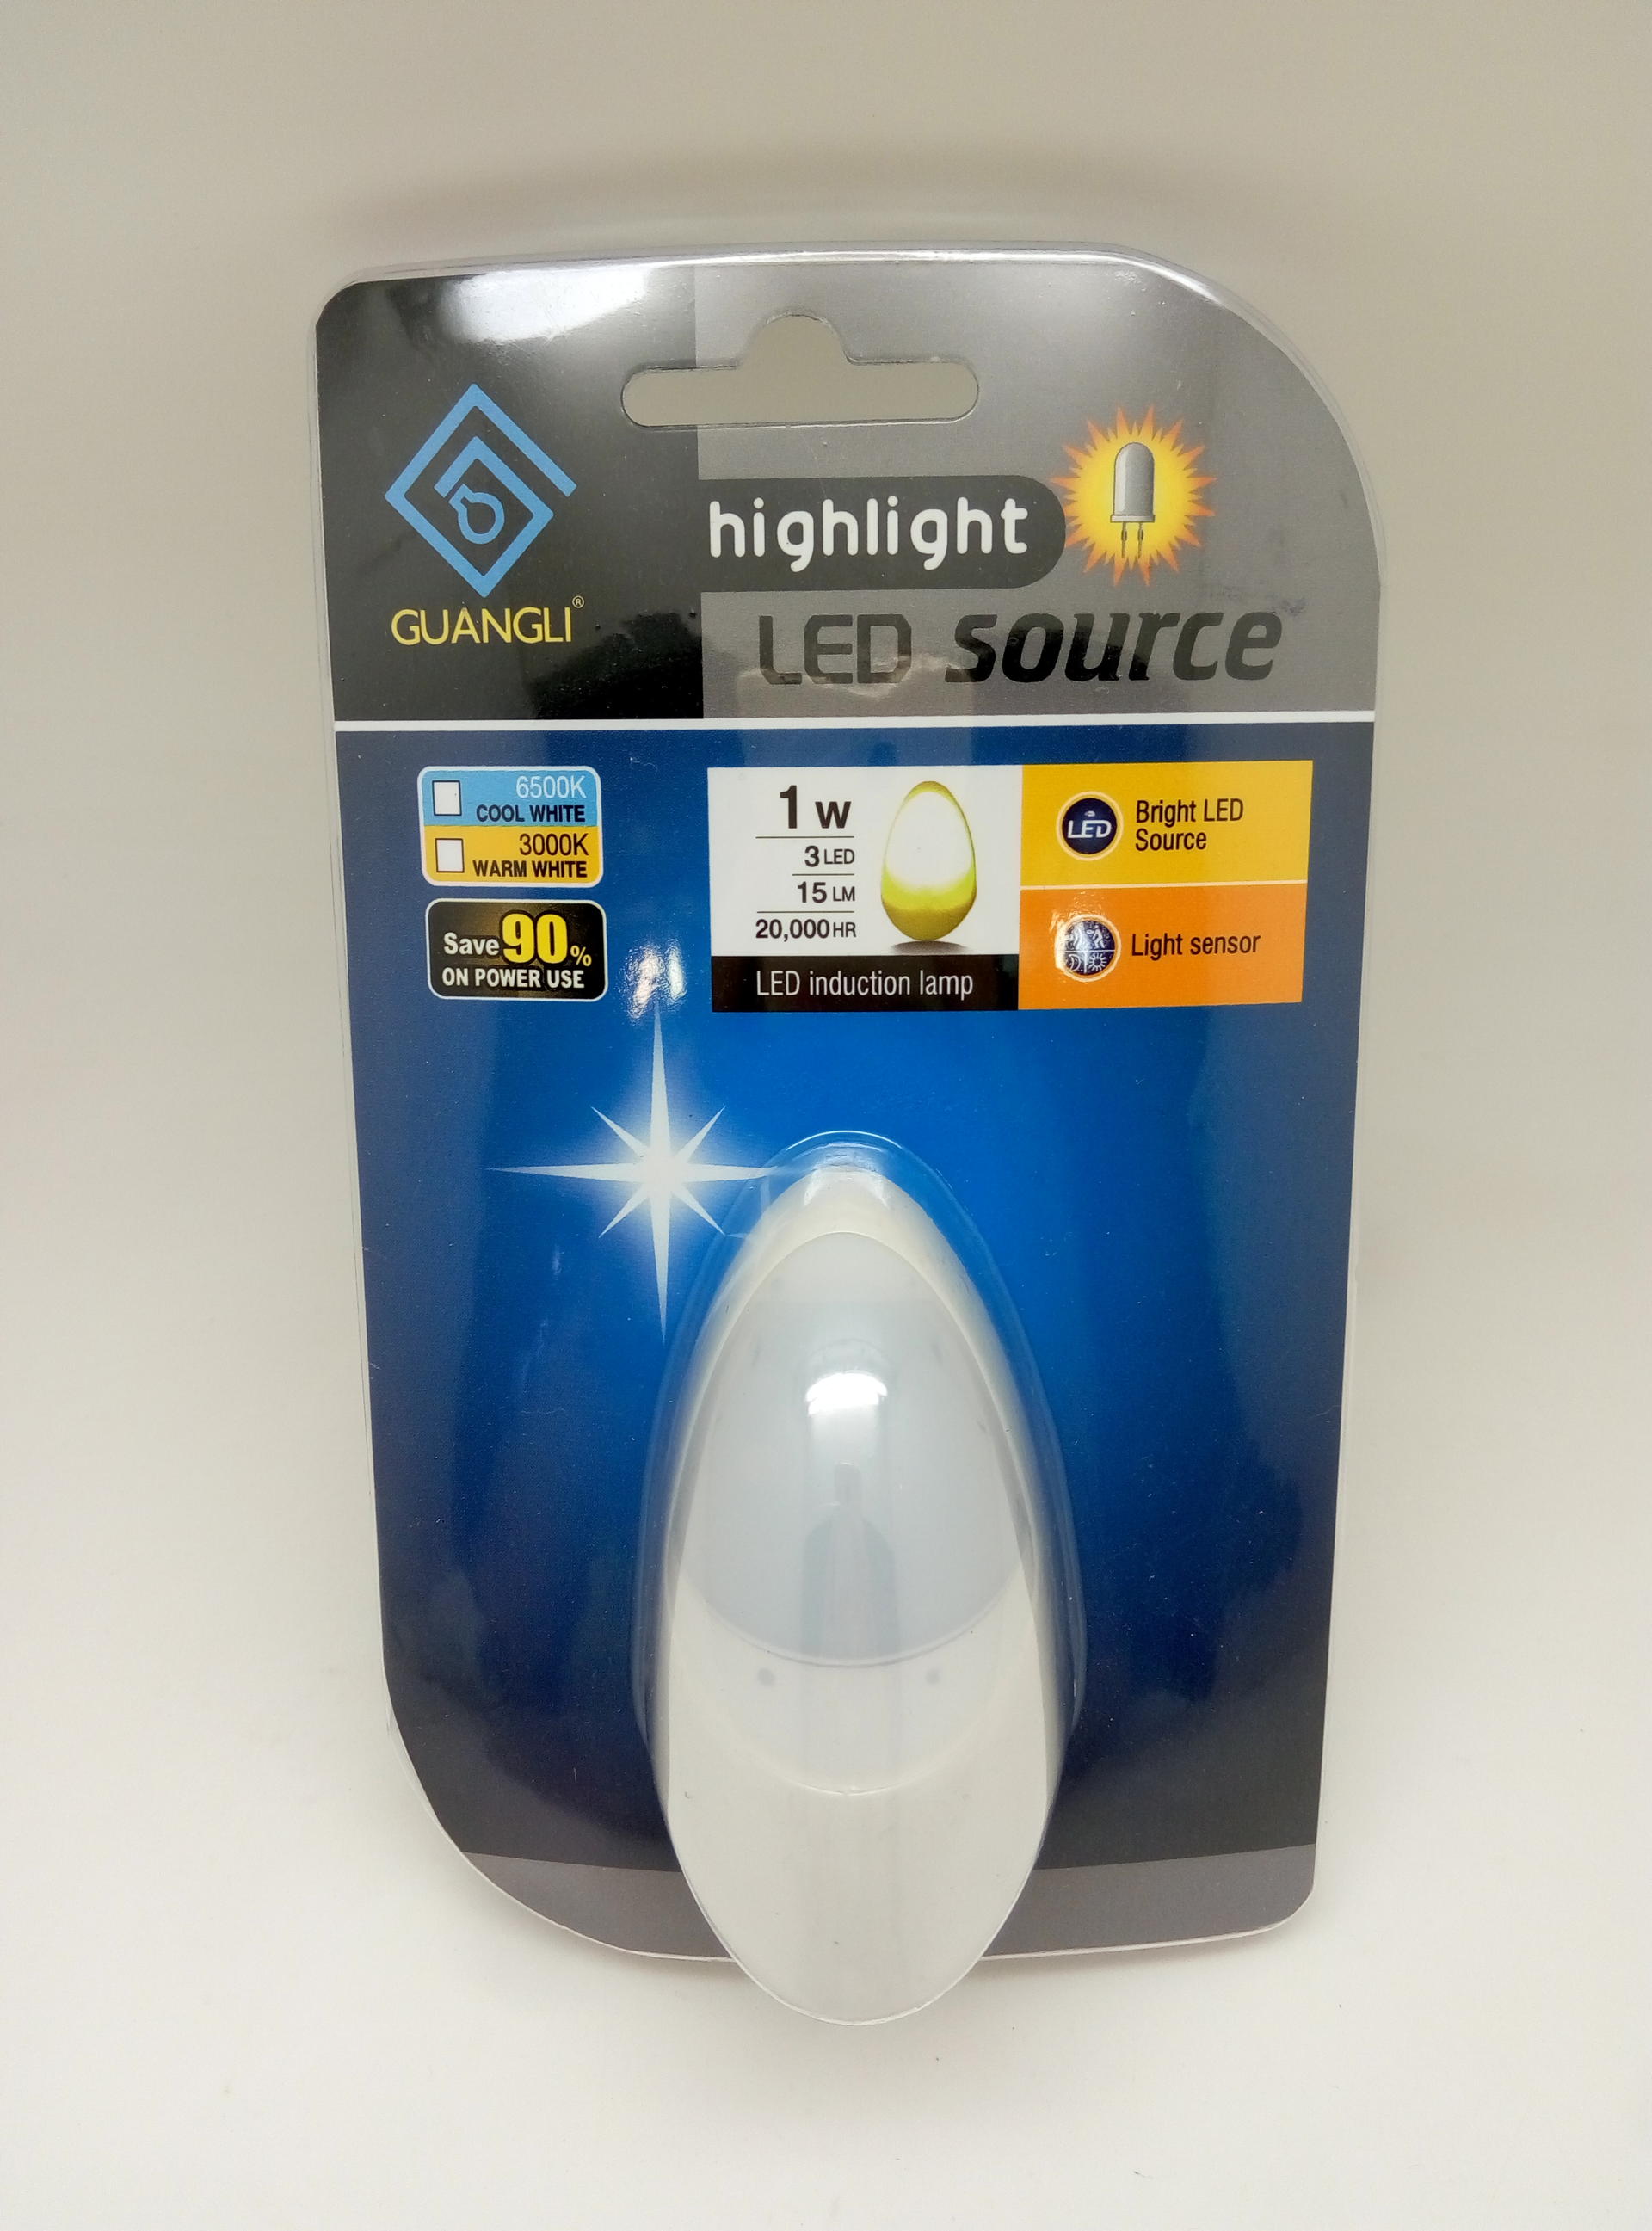 A50 OEMled abs material sensor PLUG IN night light lamp for bedroom hallway